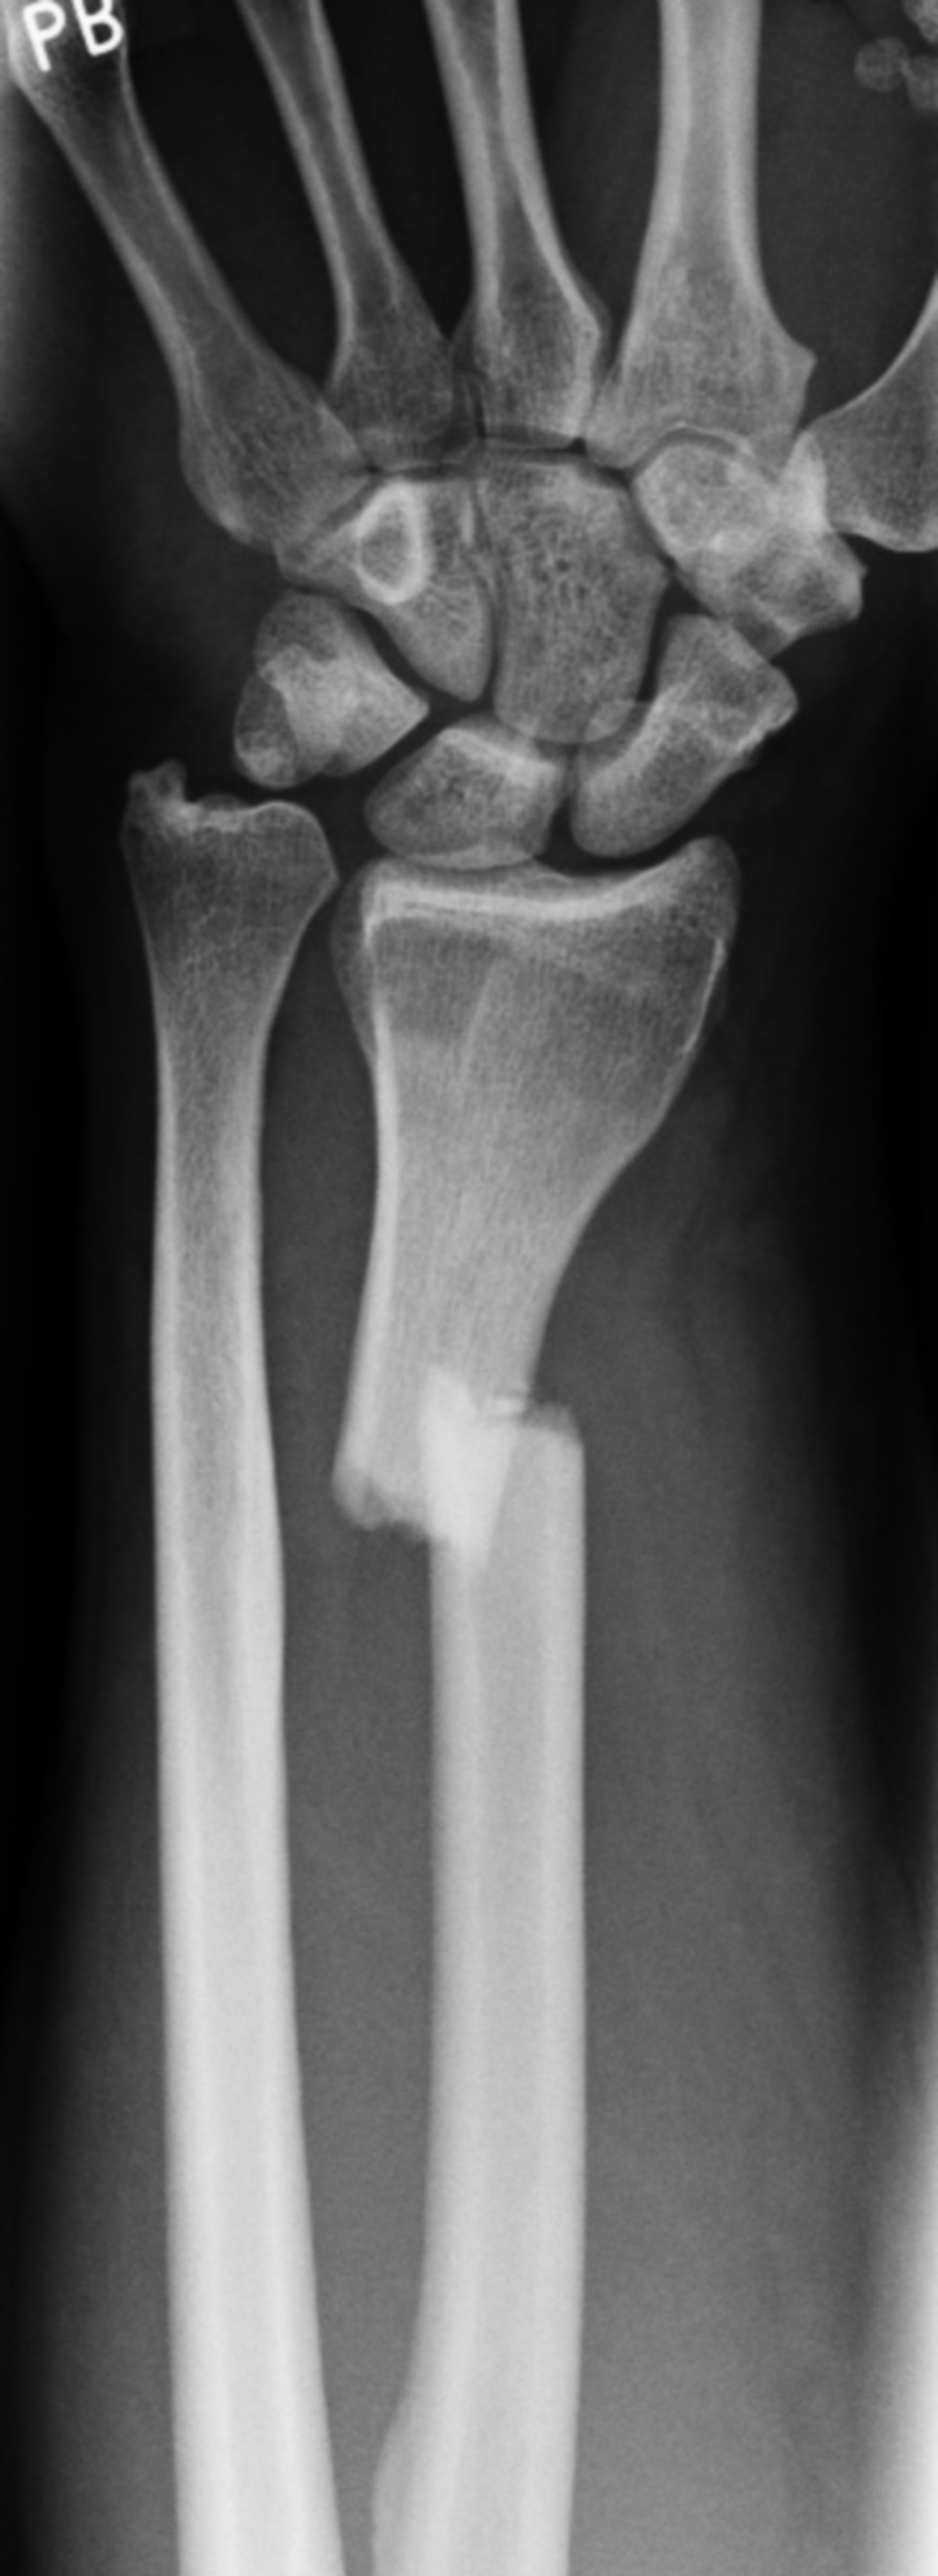 Radial fracture